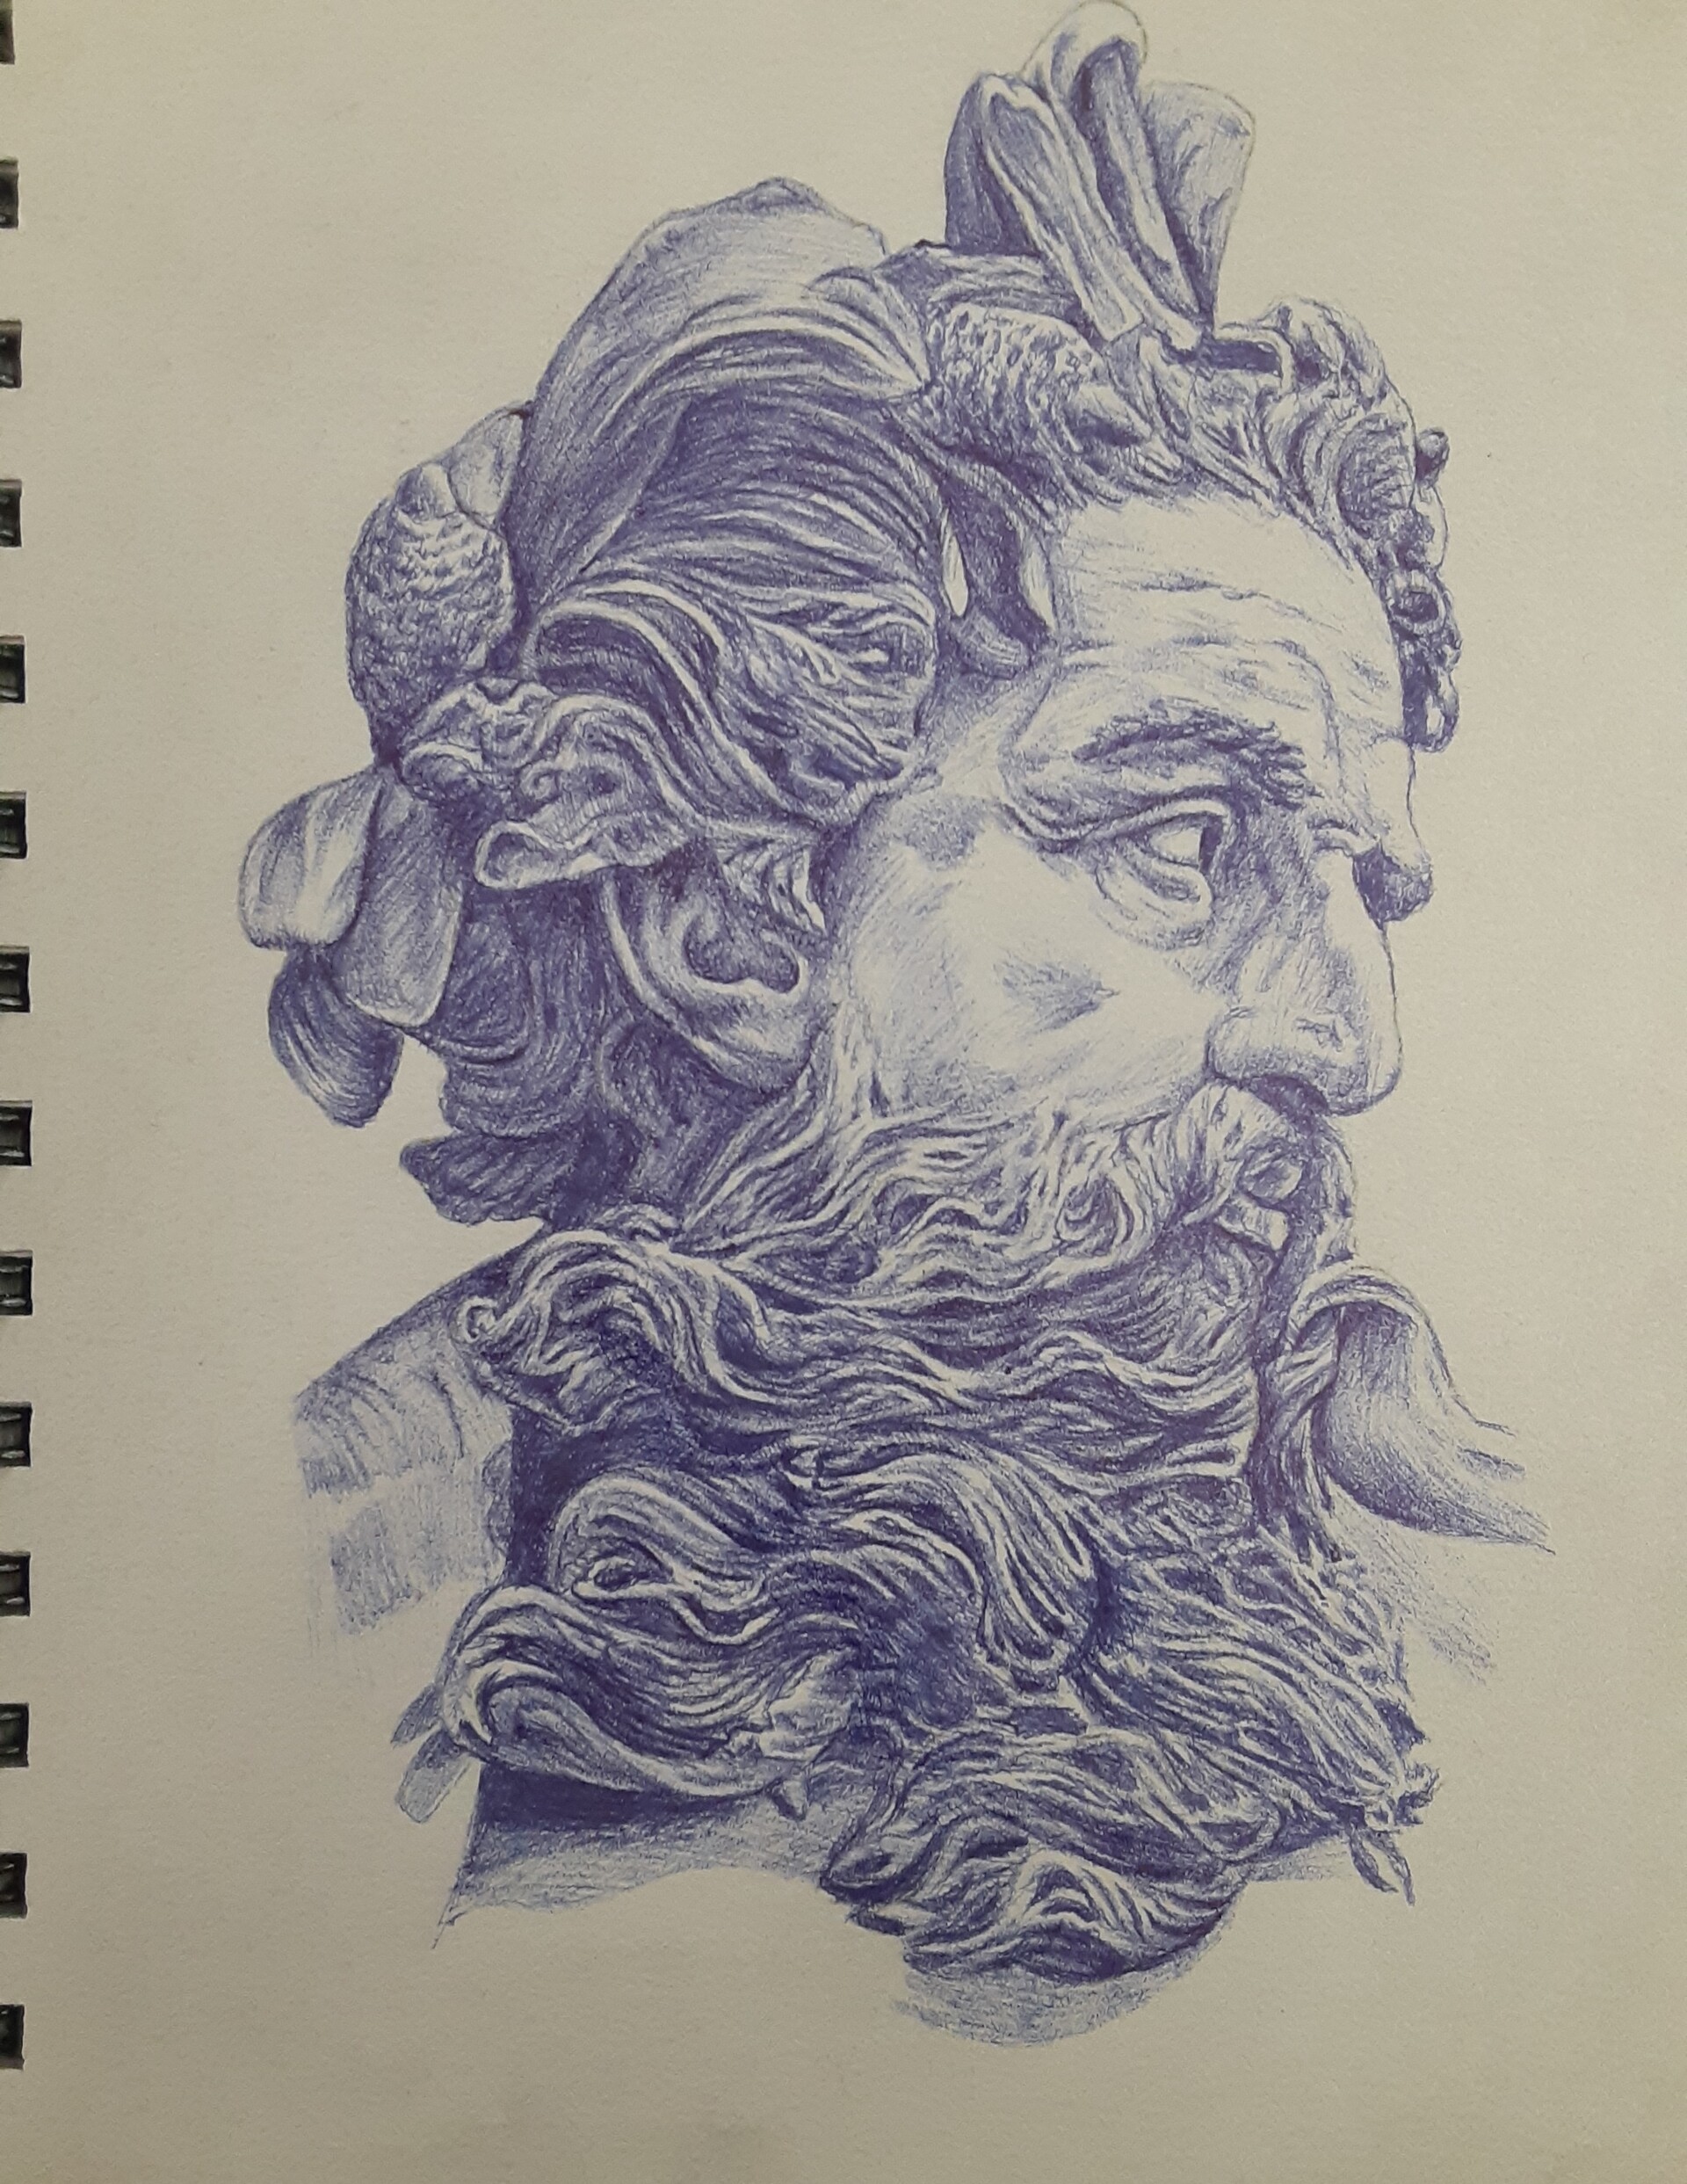 James Colter - Ballpoint pen portrait in the classical style